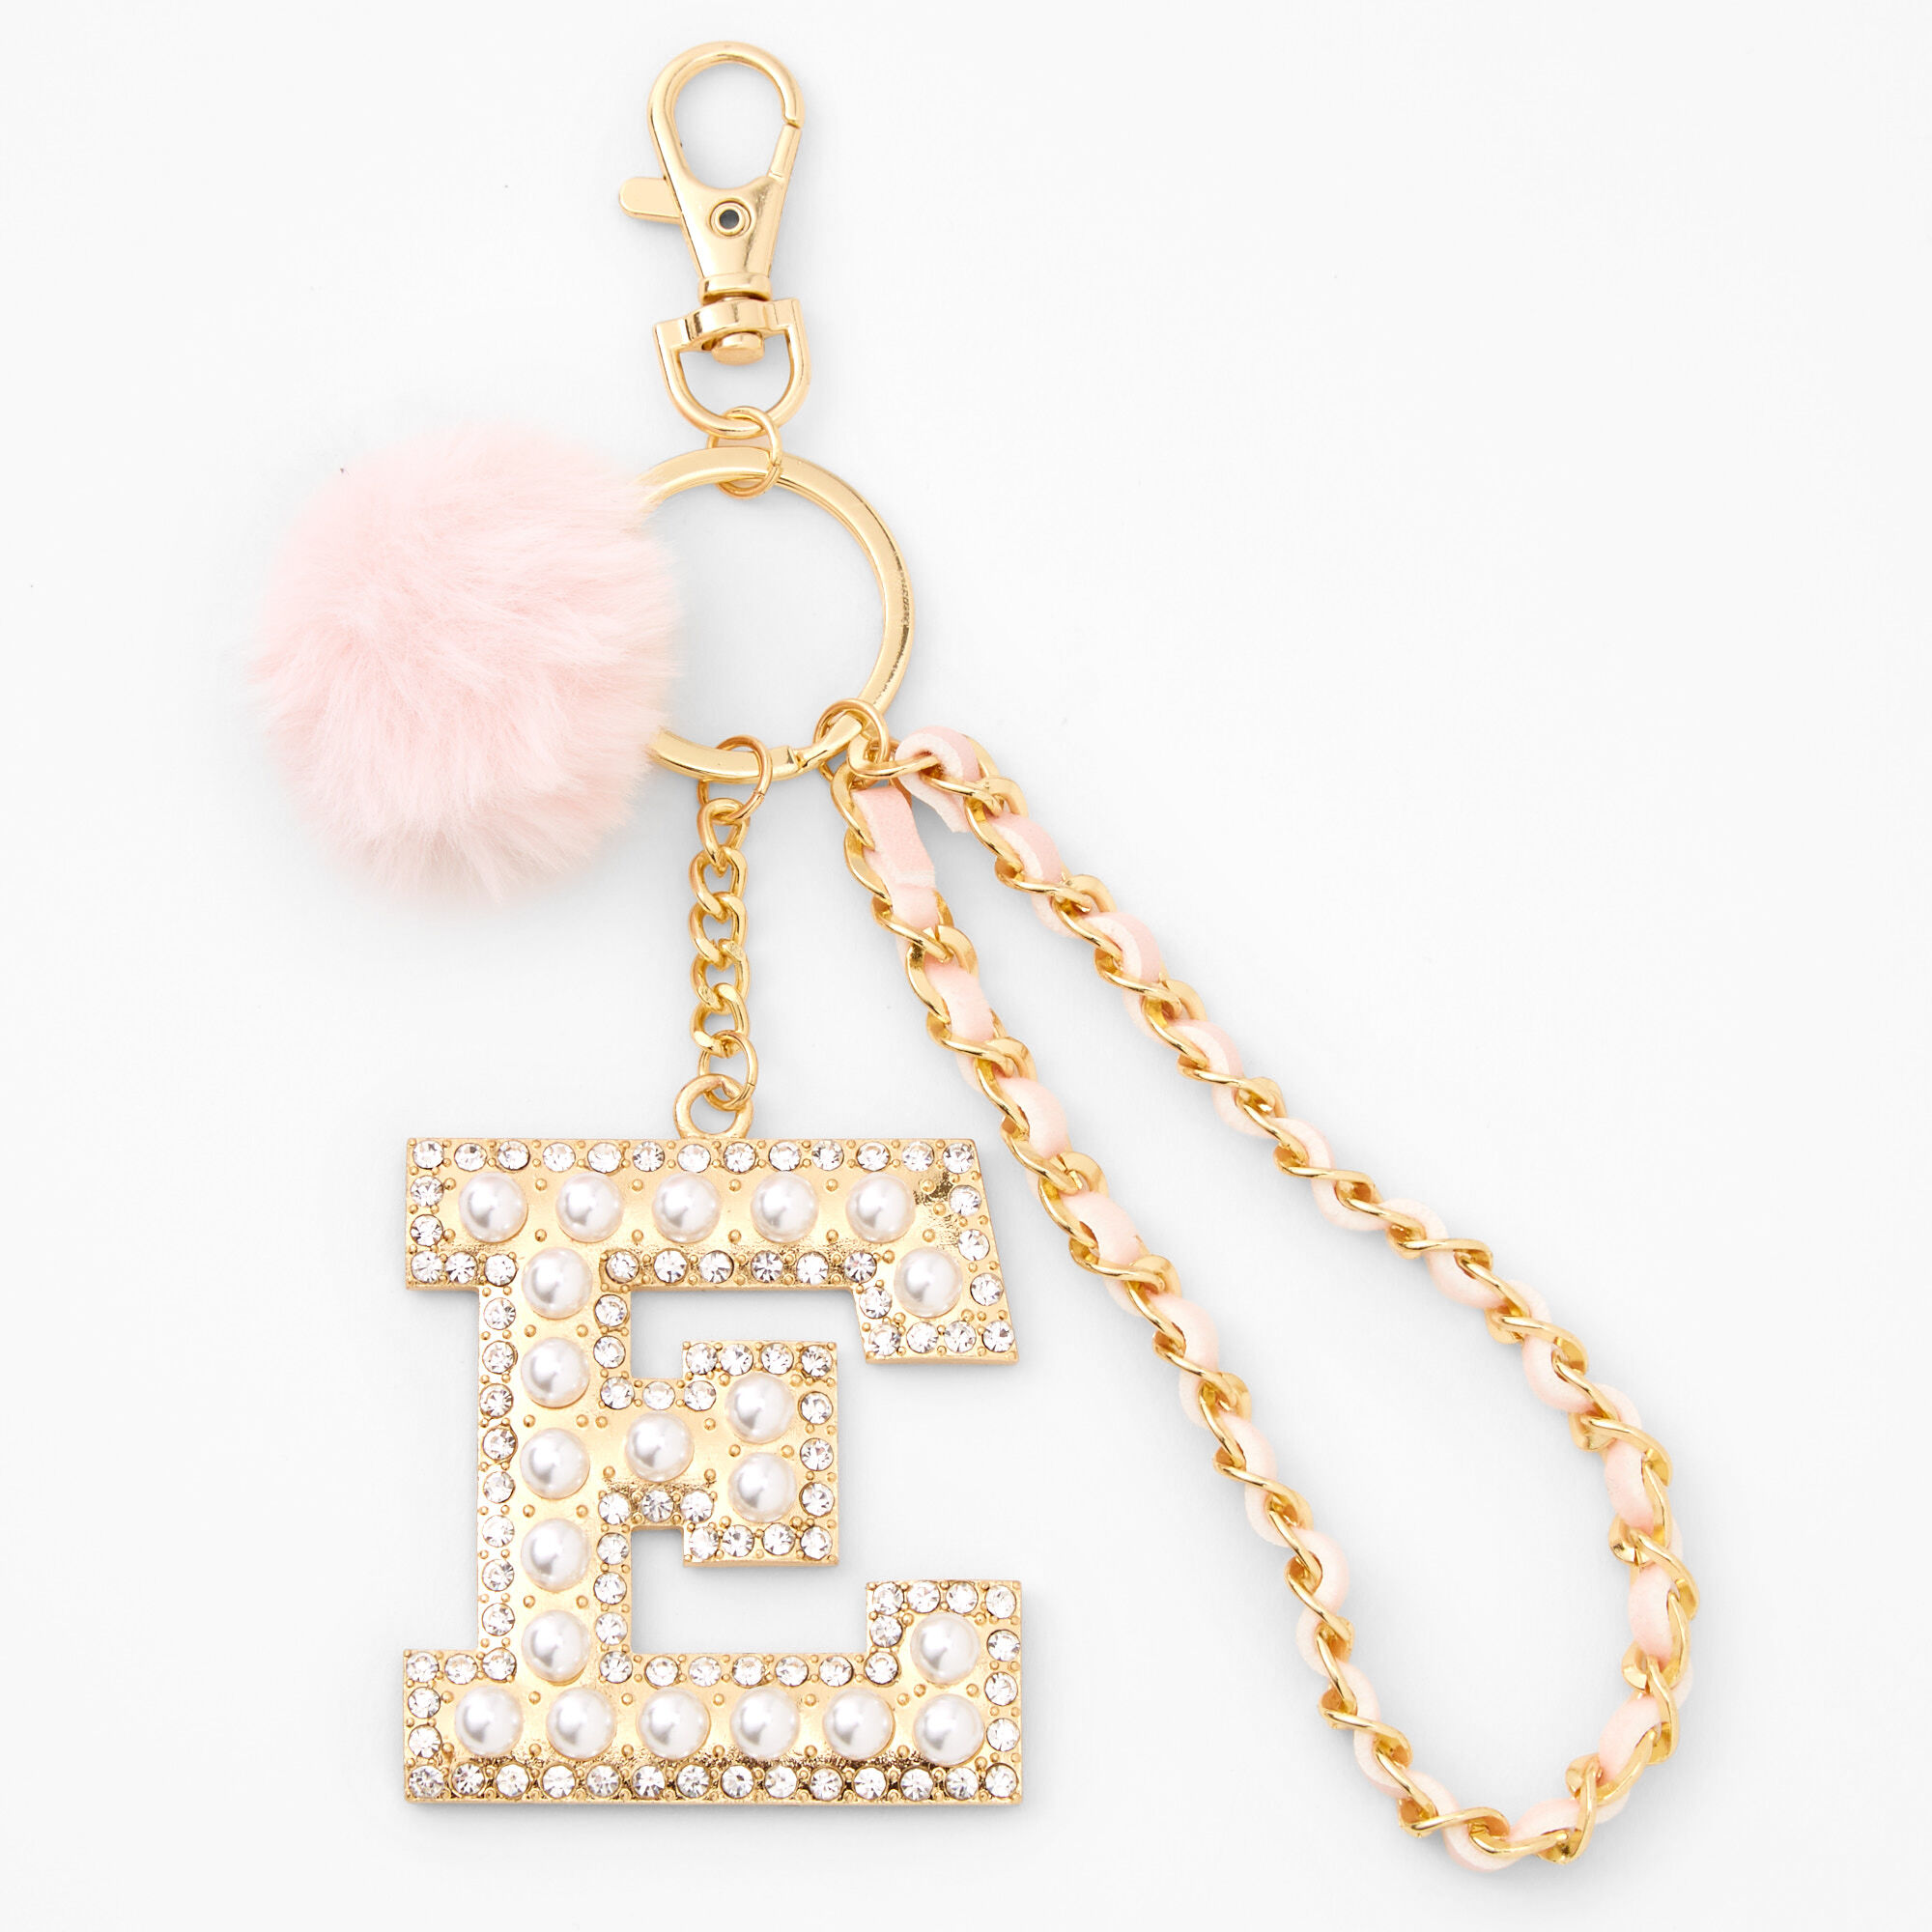 Letter and Pom Pom Ball Keychain for Best Friend Gift - Best